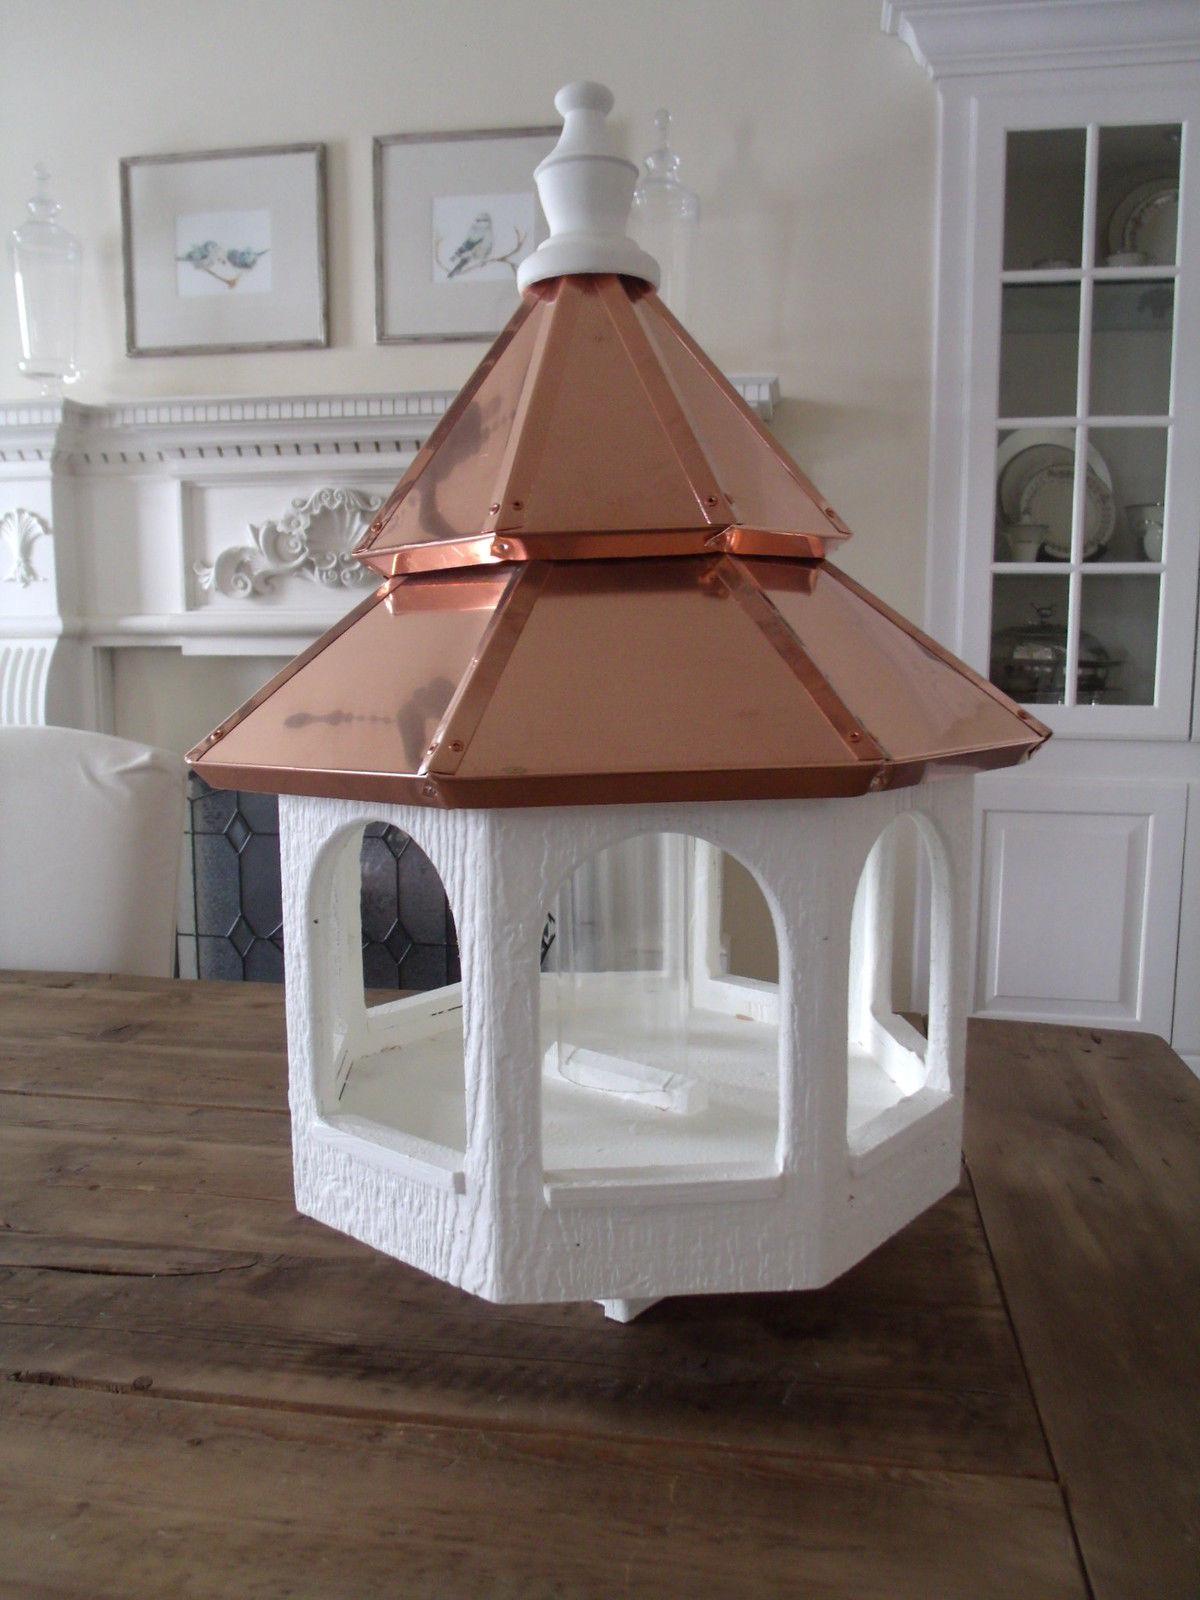 Single Hole Vinyl Bird House with Polished Copper Top - 24 inches TALL